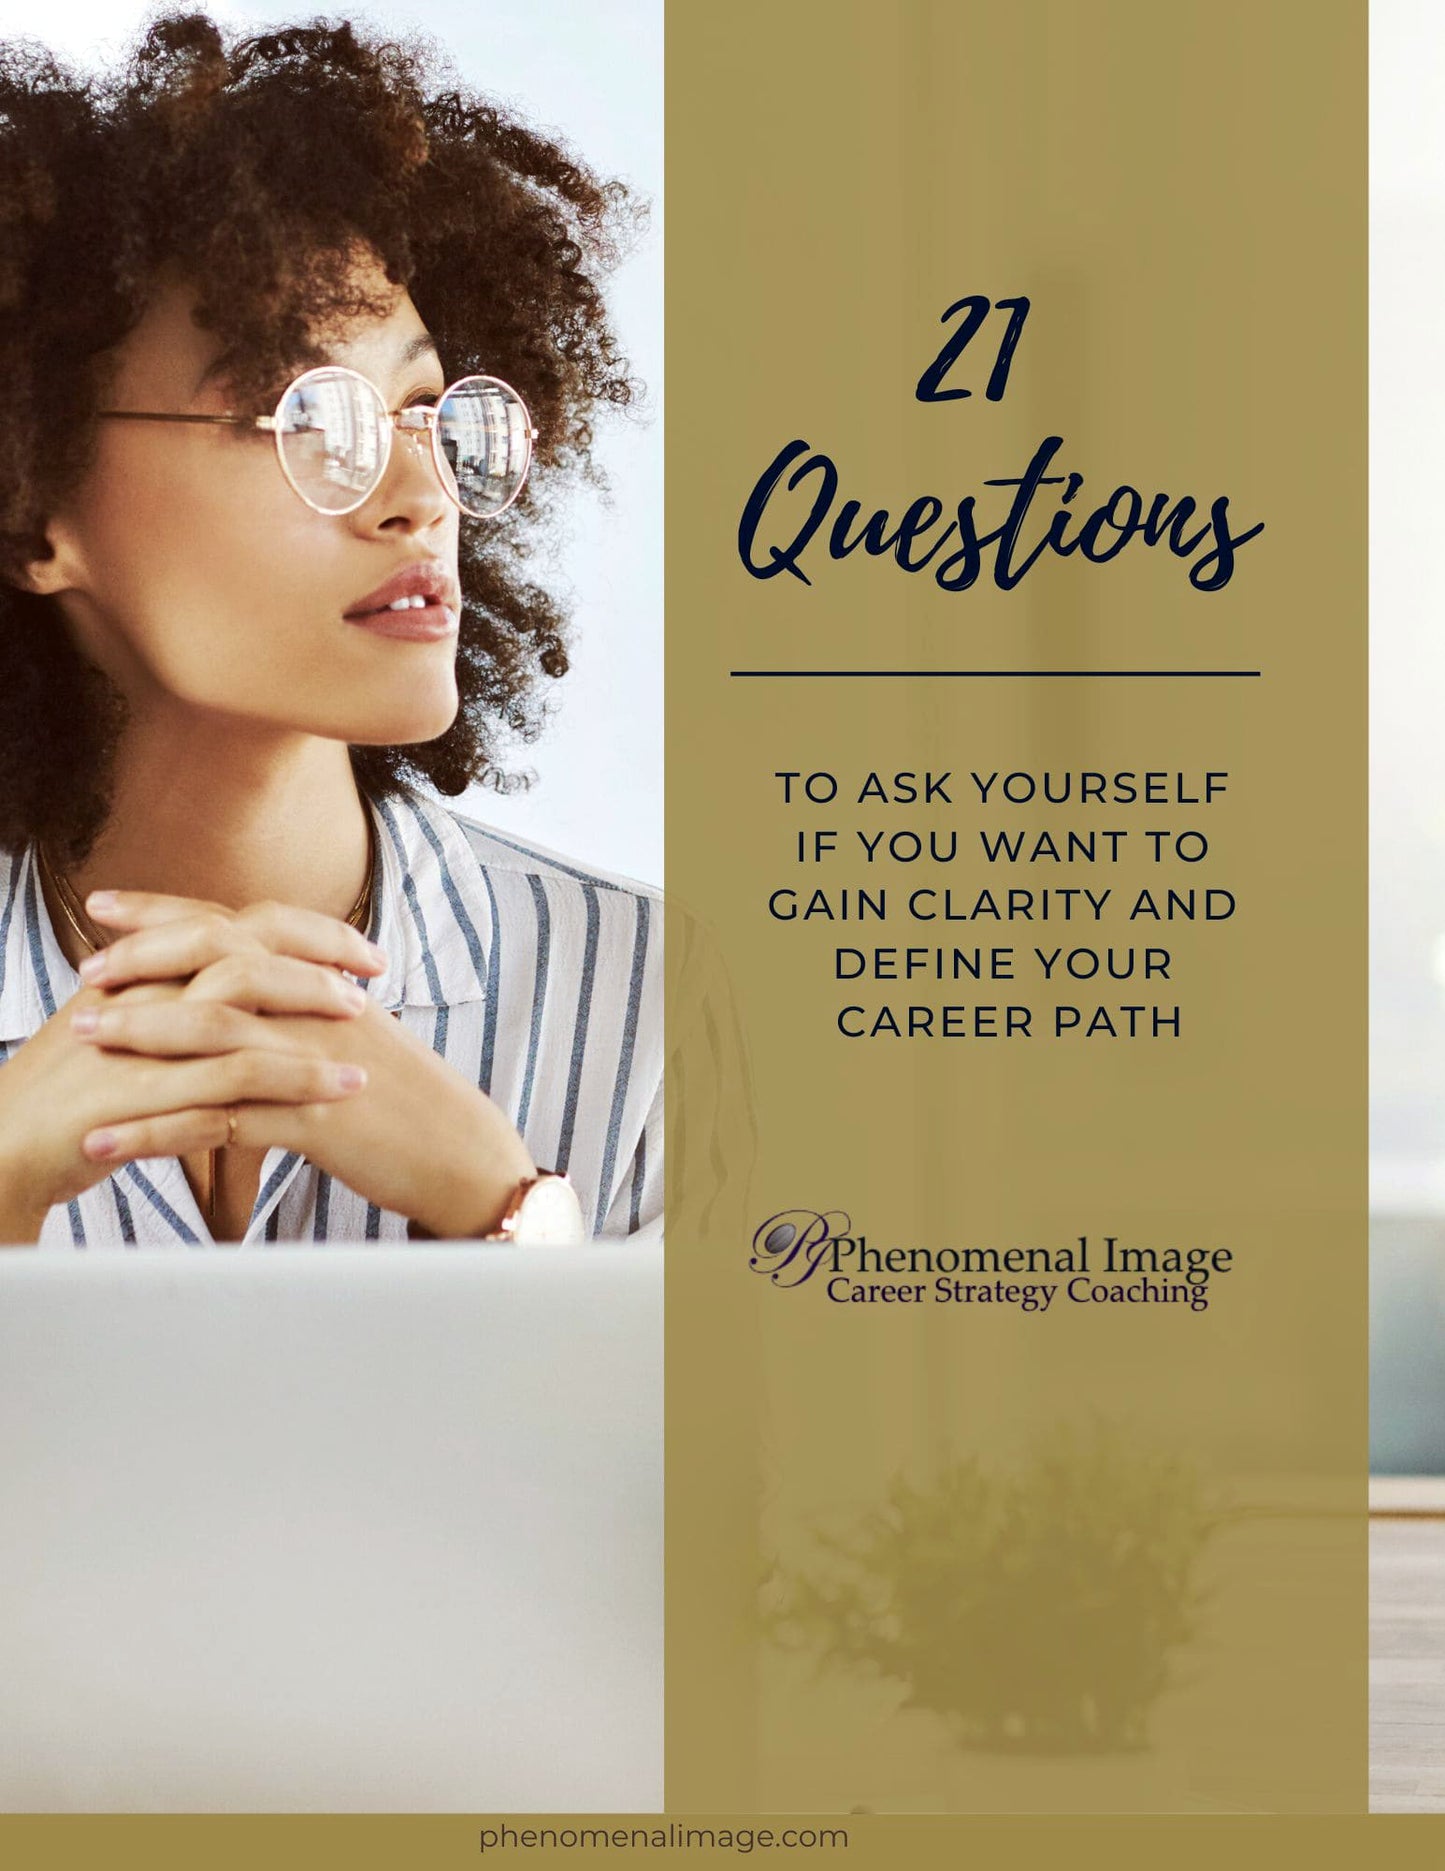 21 Questions to Ask Yourself if You Want to Gain Clarity and Define Your Career Path